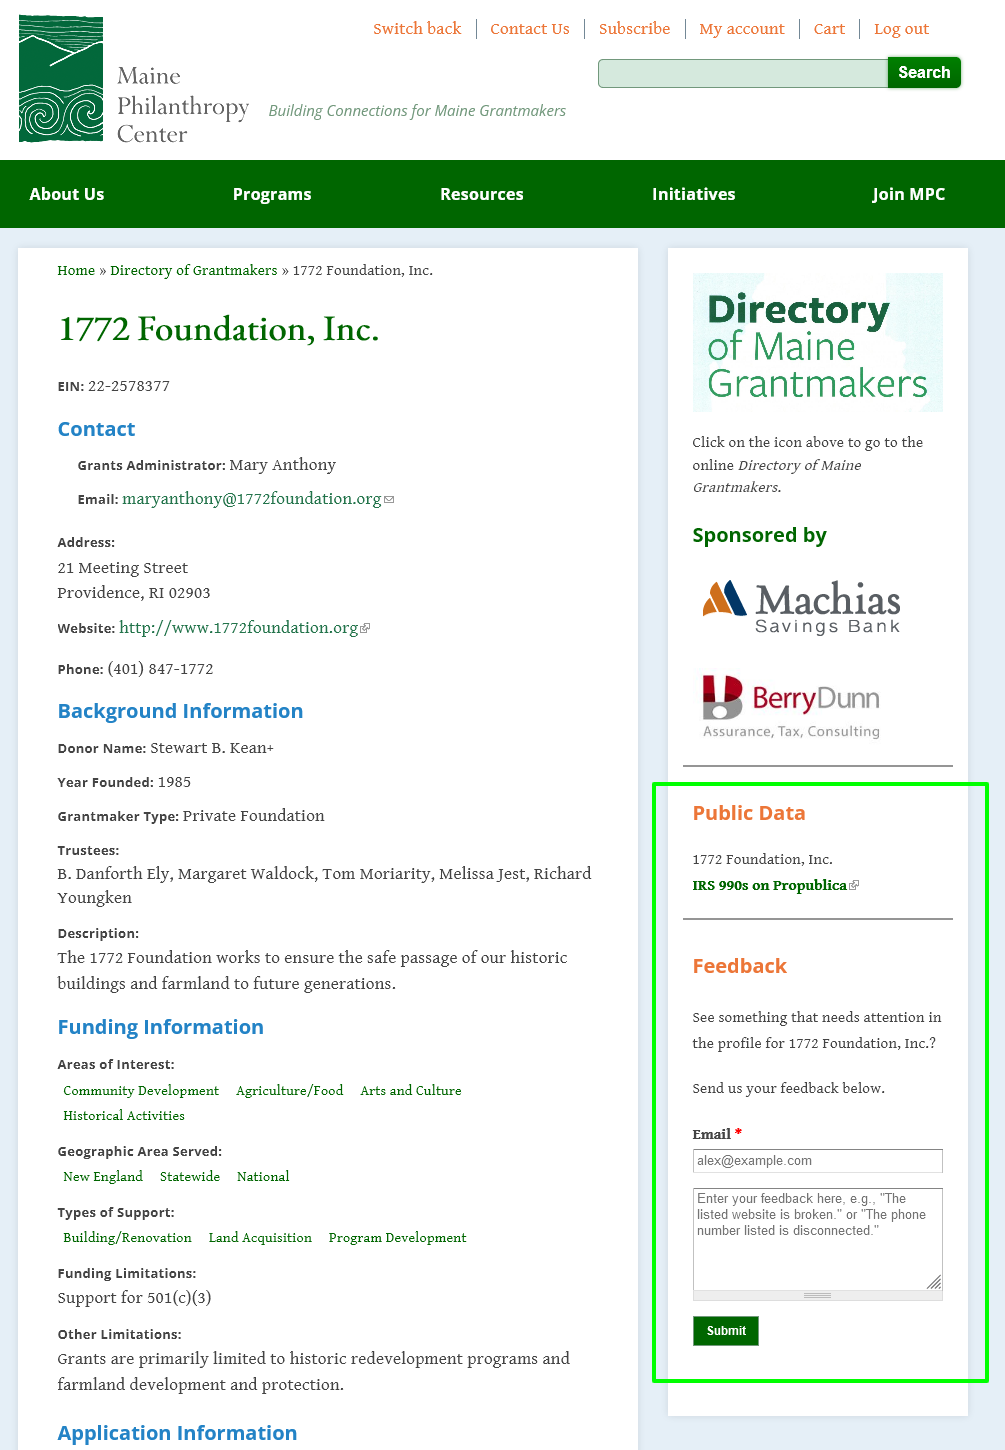 Screenshot of online Directory of Maine Grantmakers with green square around Public Data and Feedback sections